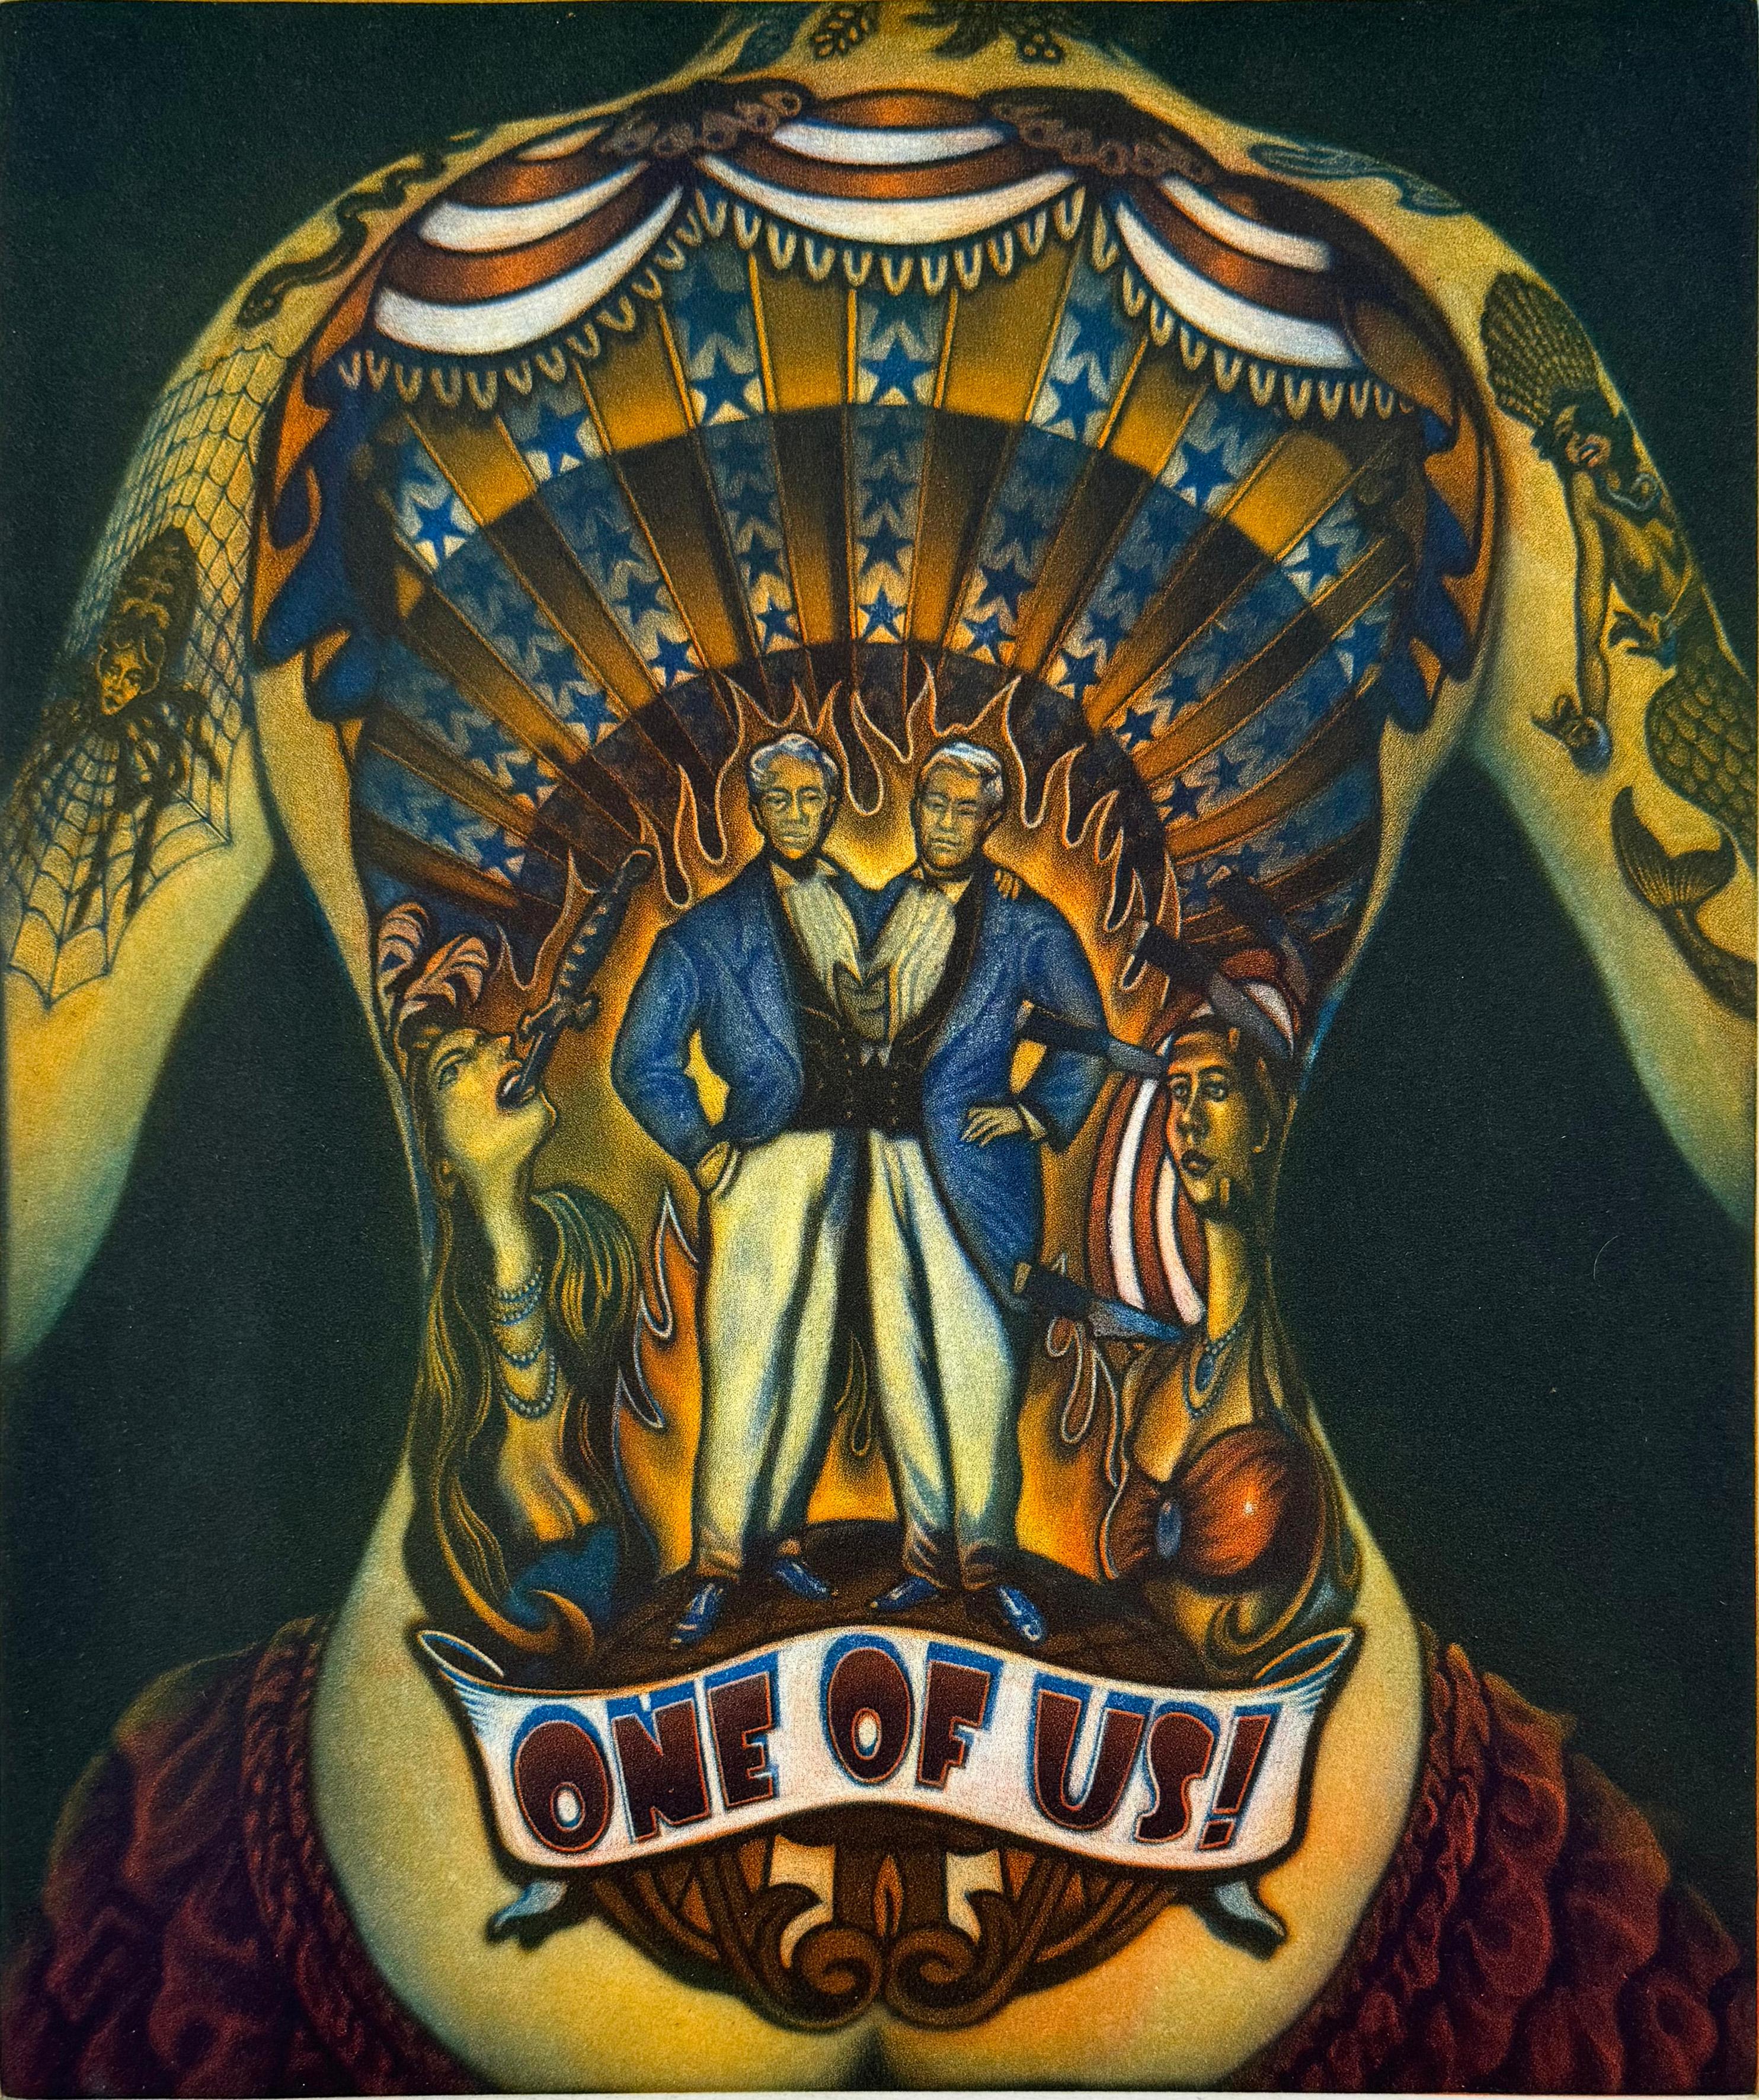 Medium: Color mezzotint
Year: 2024
Edition: 25
Image Size: 24 x 18 inches
Signed, titled and numbered in pencil by the artist

Dramatic mezzotint of the tattooed back of a circus performer, from the Circus cyle of prints by Art Werger.

Werger has